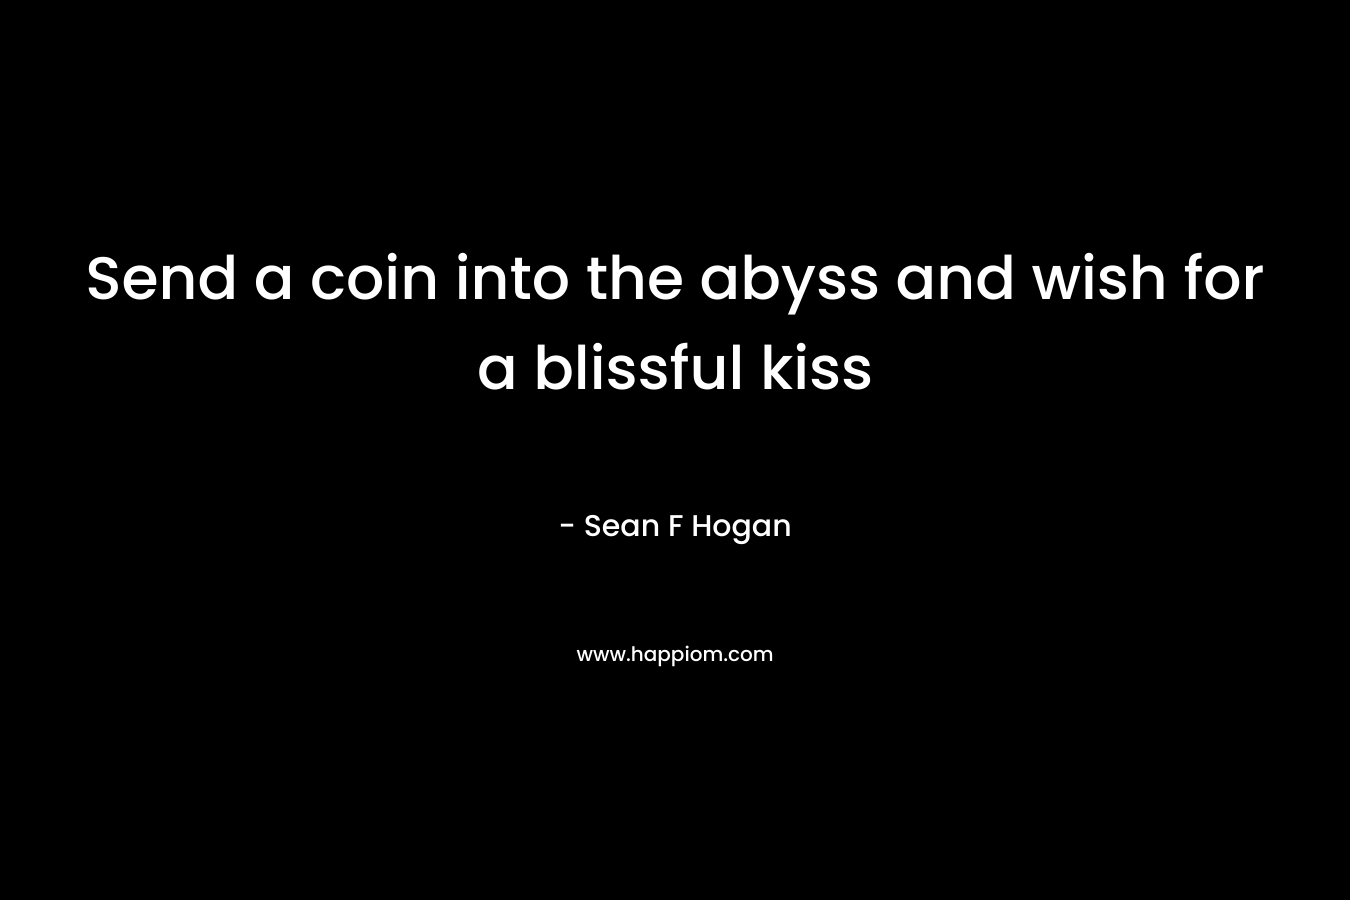 Send a coin into the abyss and wish for a blissful kiss